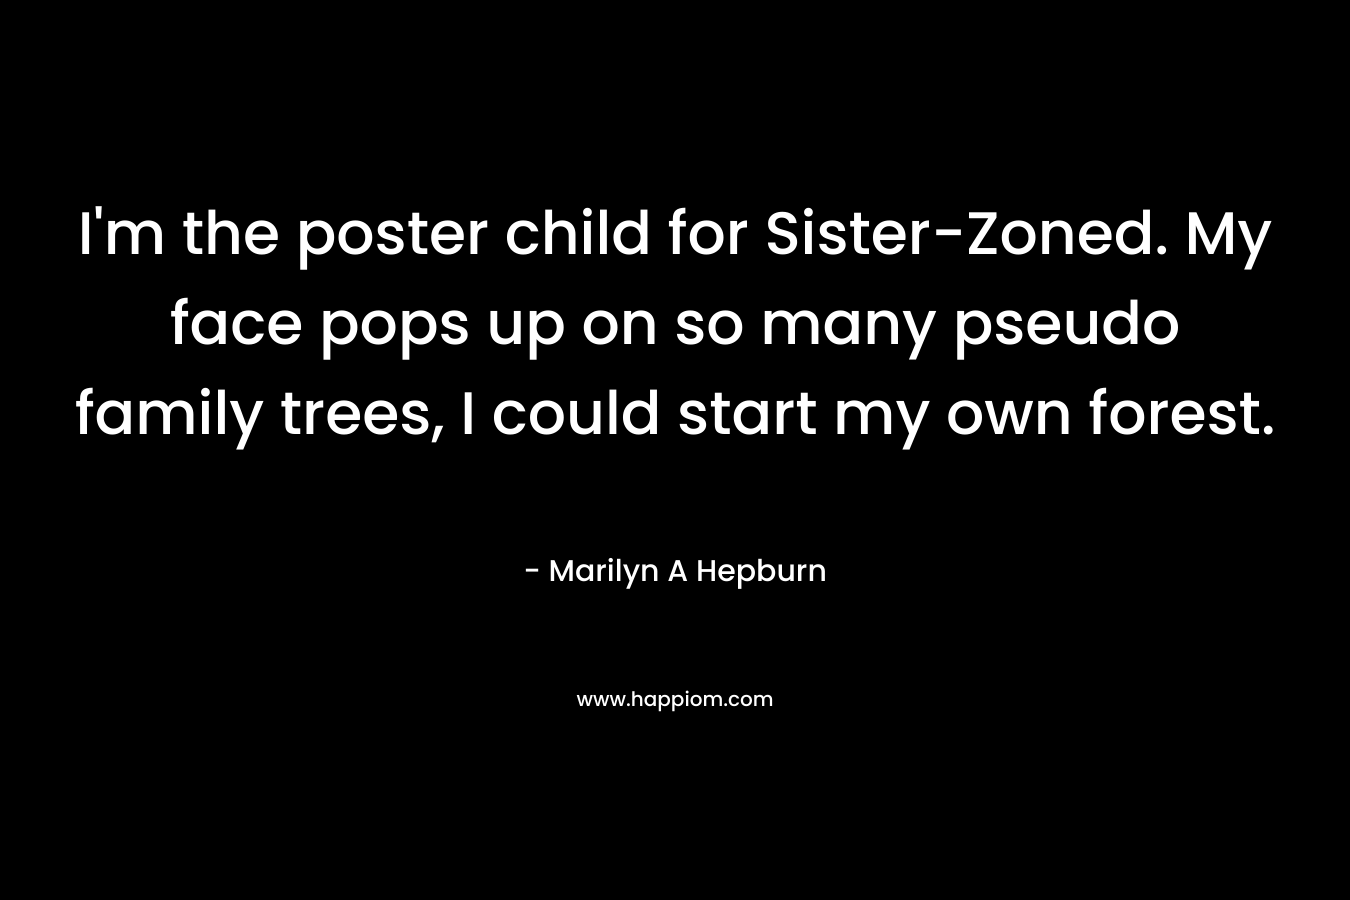 I’m the poster child for Sister-Zoned. My face pops up on so many pseudo family trees, I could start my own forest. – Marilyn A Hepburn